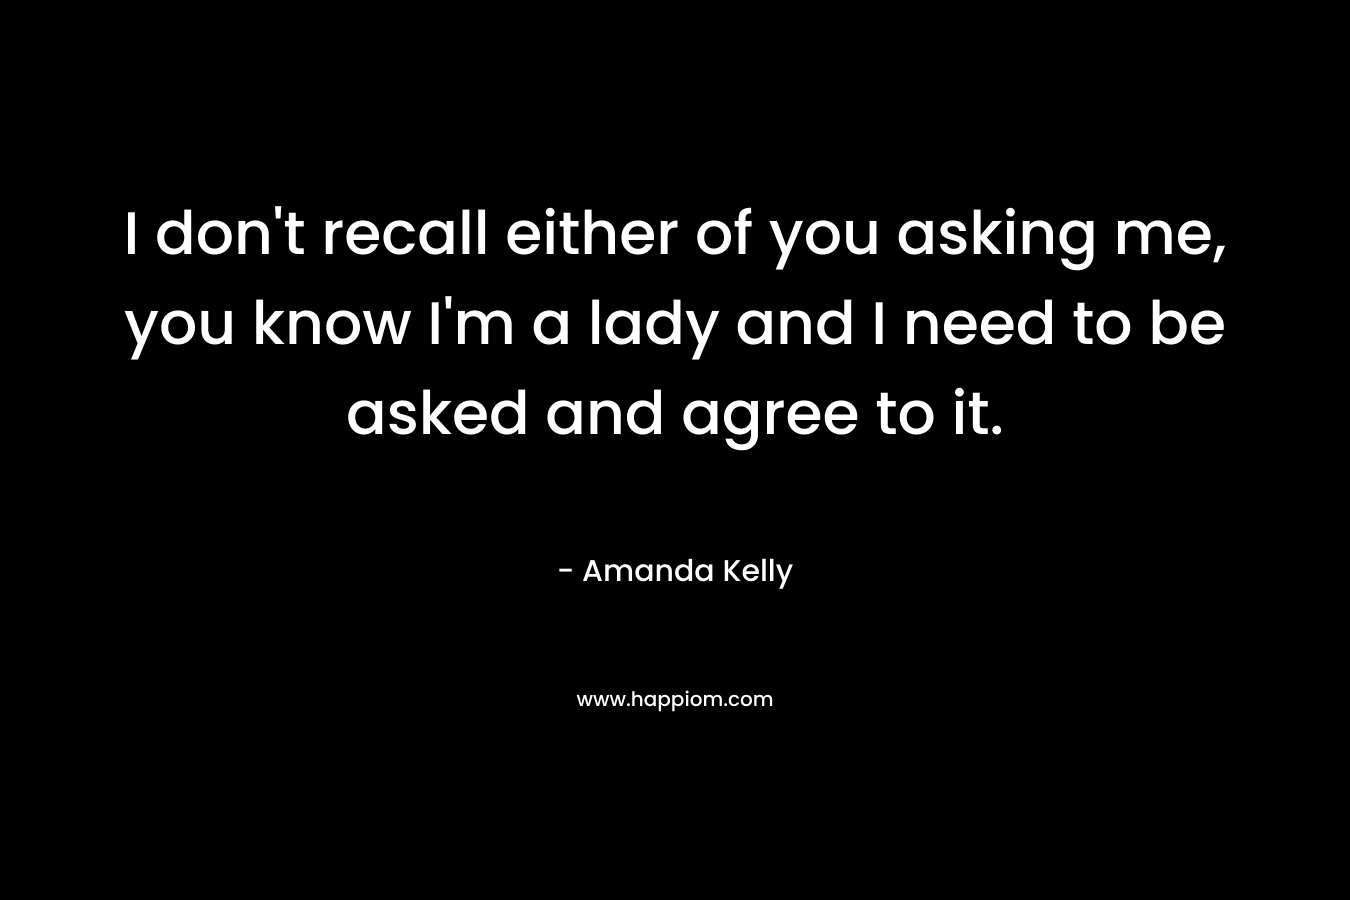 I don’t recall either of you asking me, you know I’m a lady and I need to be asked and agree to it. – Amanda Kelly